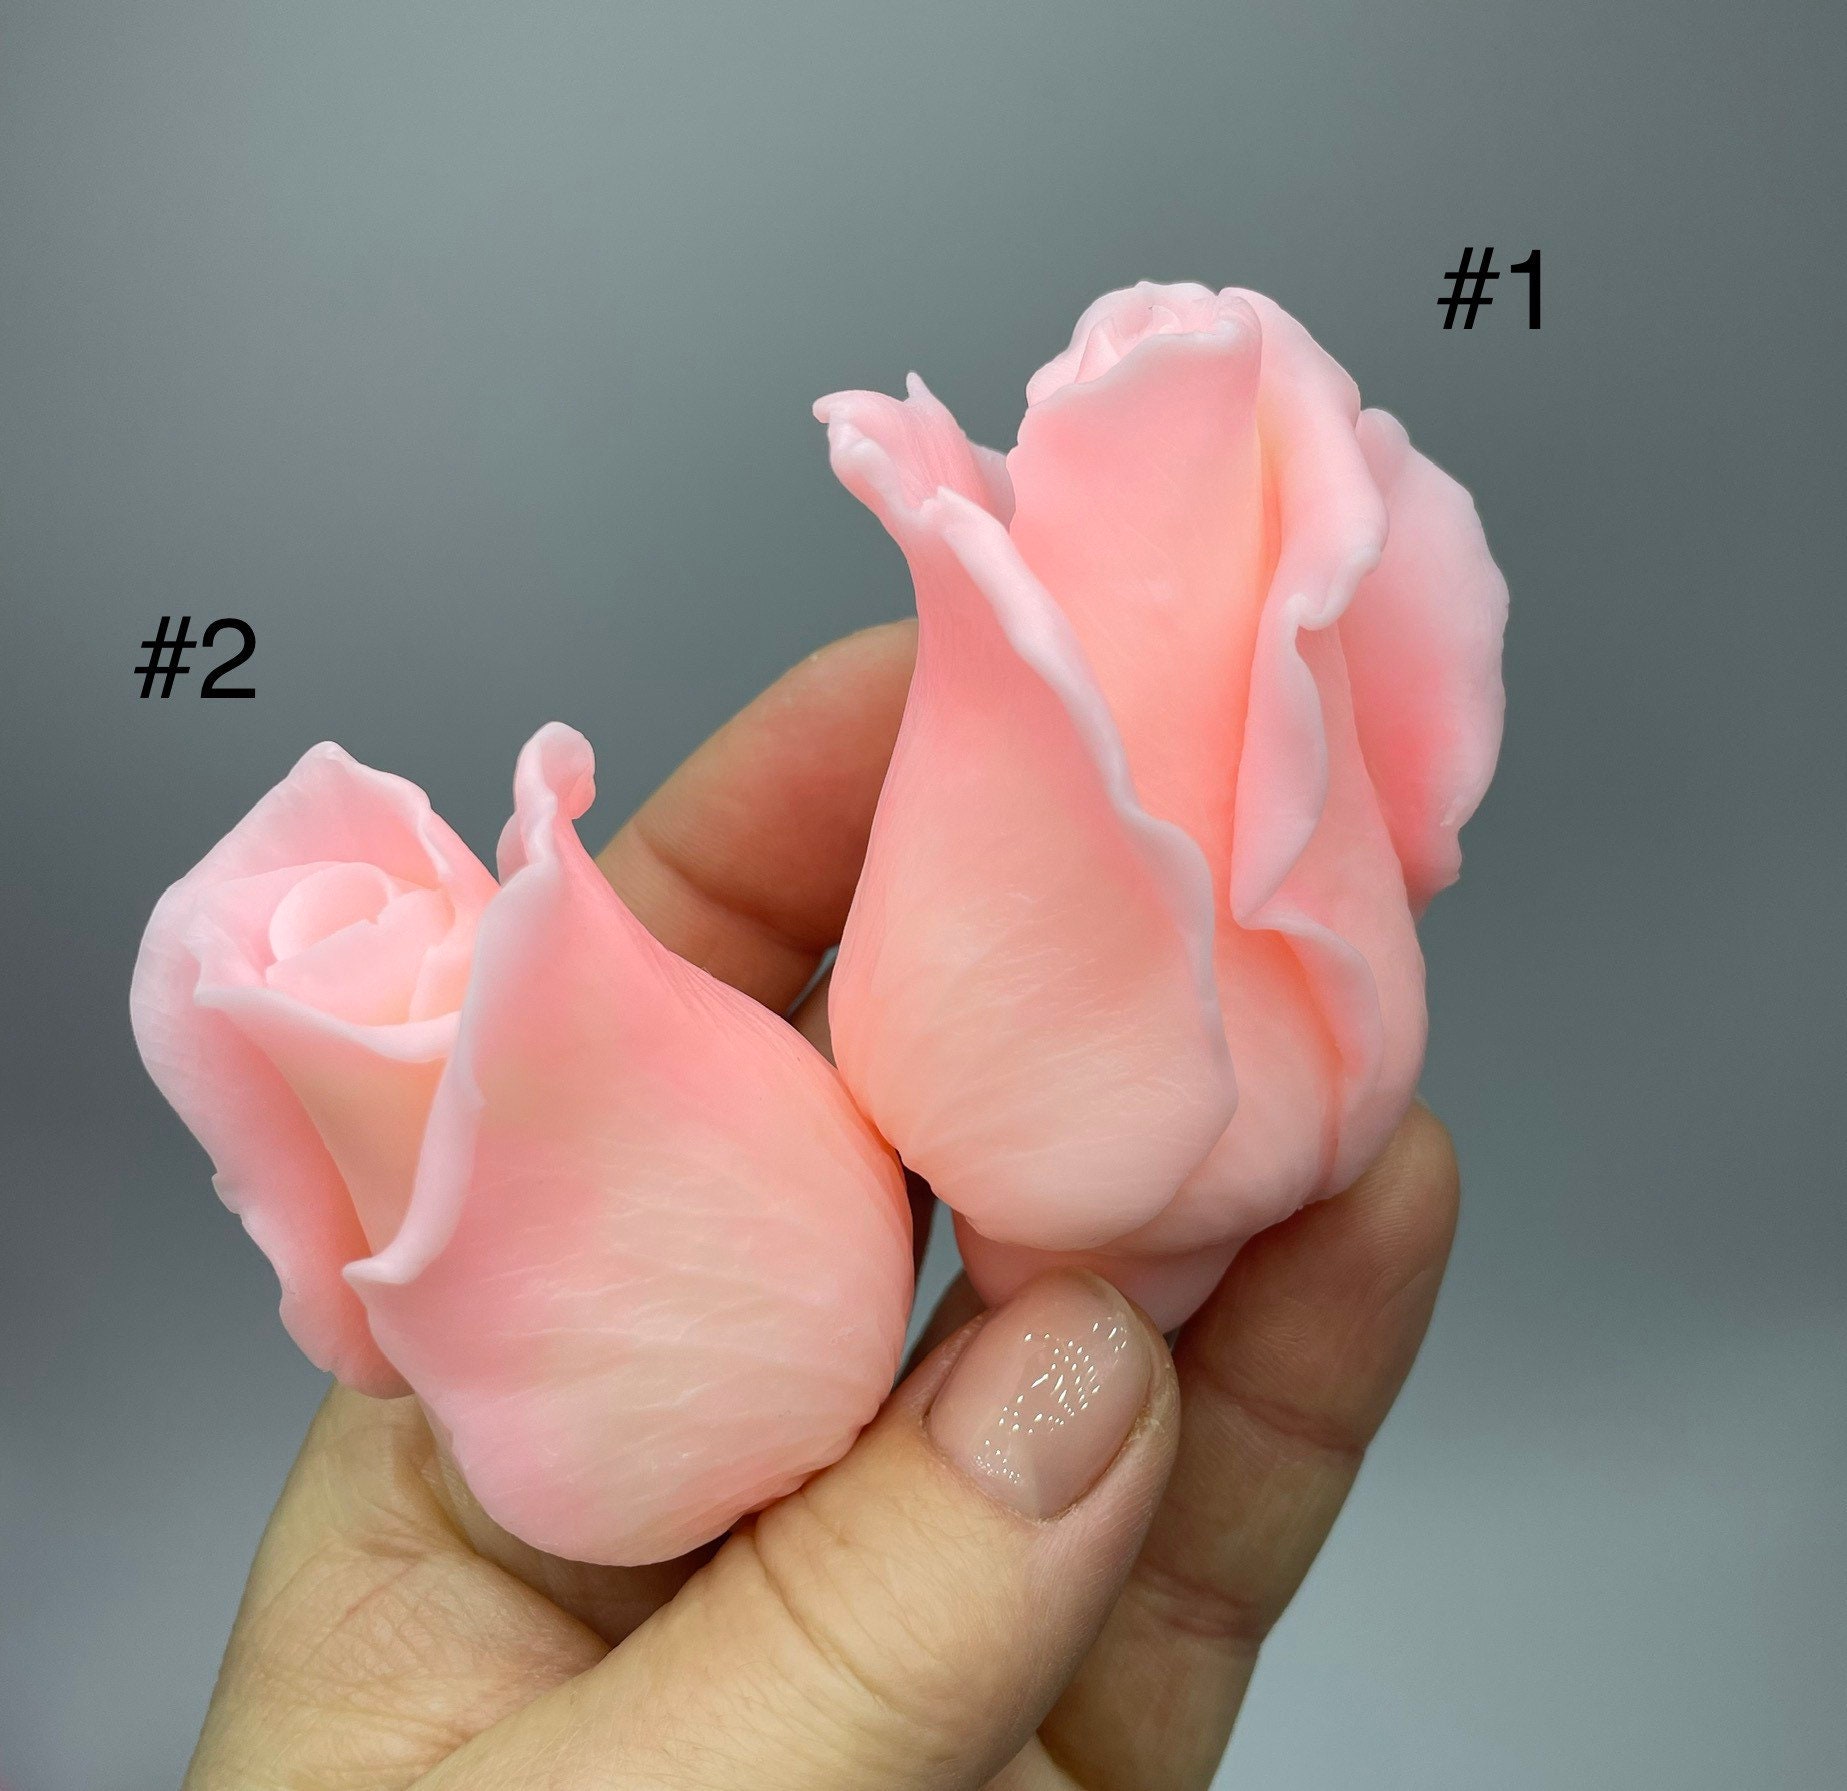 4 In 1 3D Rose Ice Maker With Large Flower Shape Pink Mold On Food